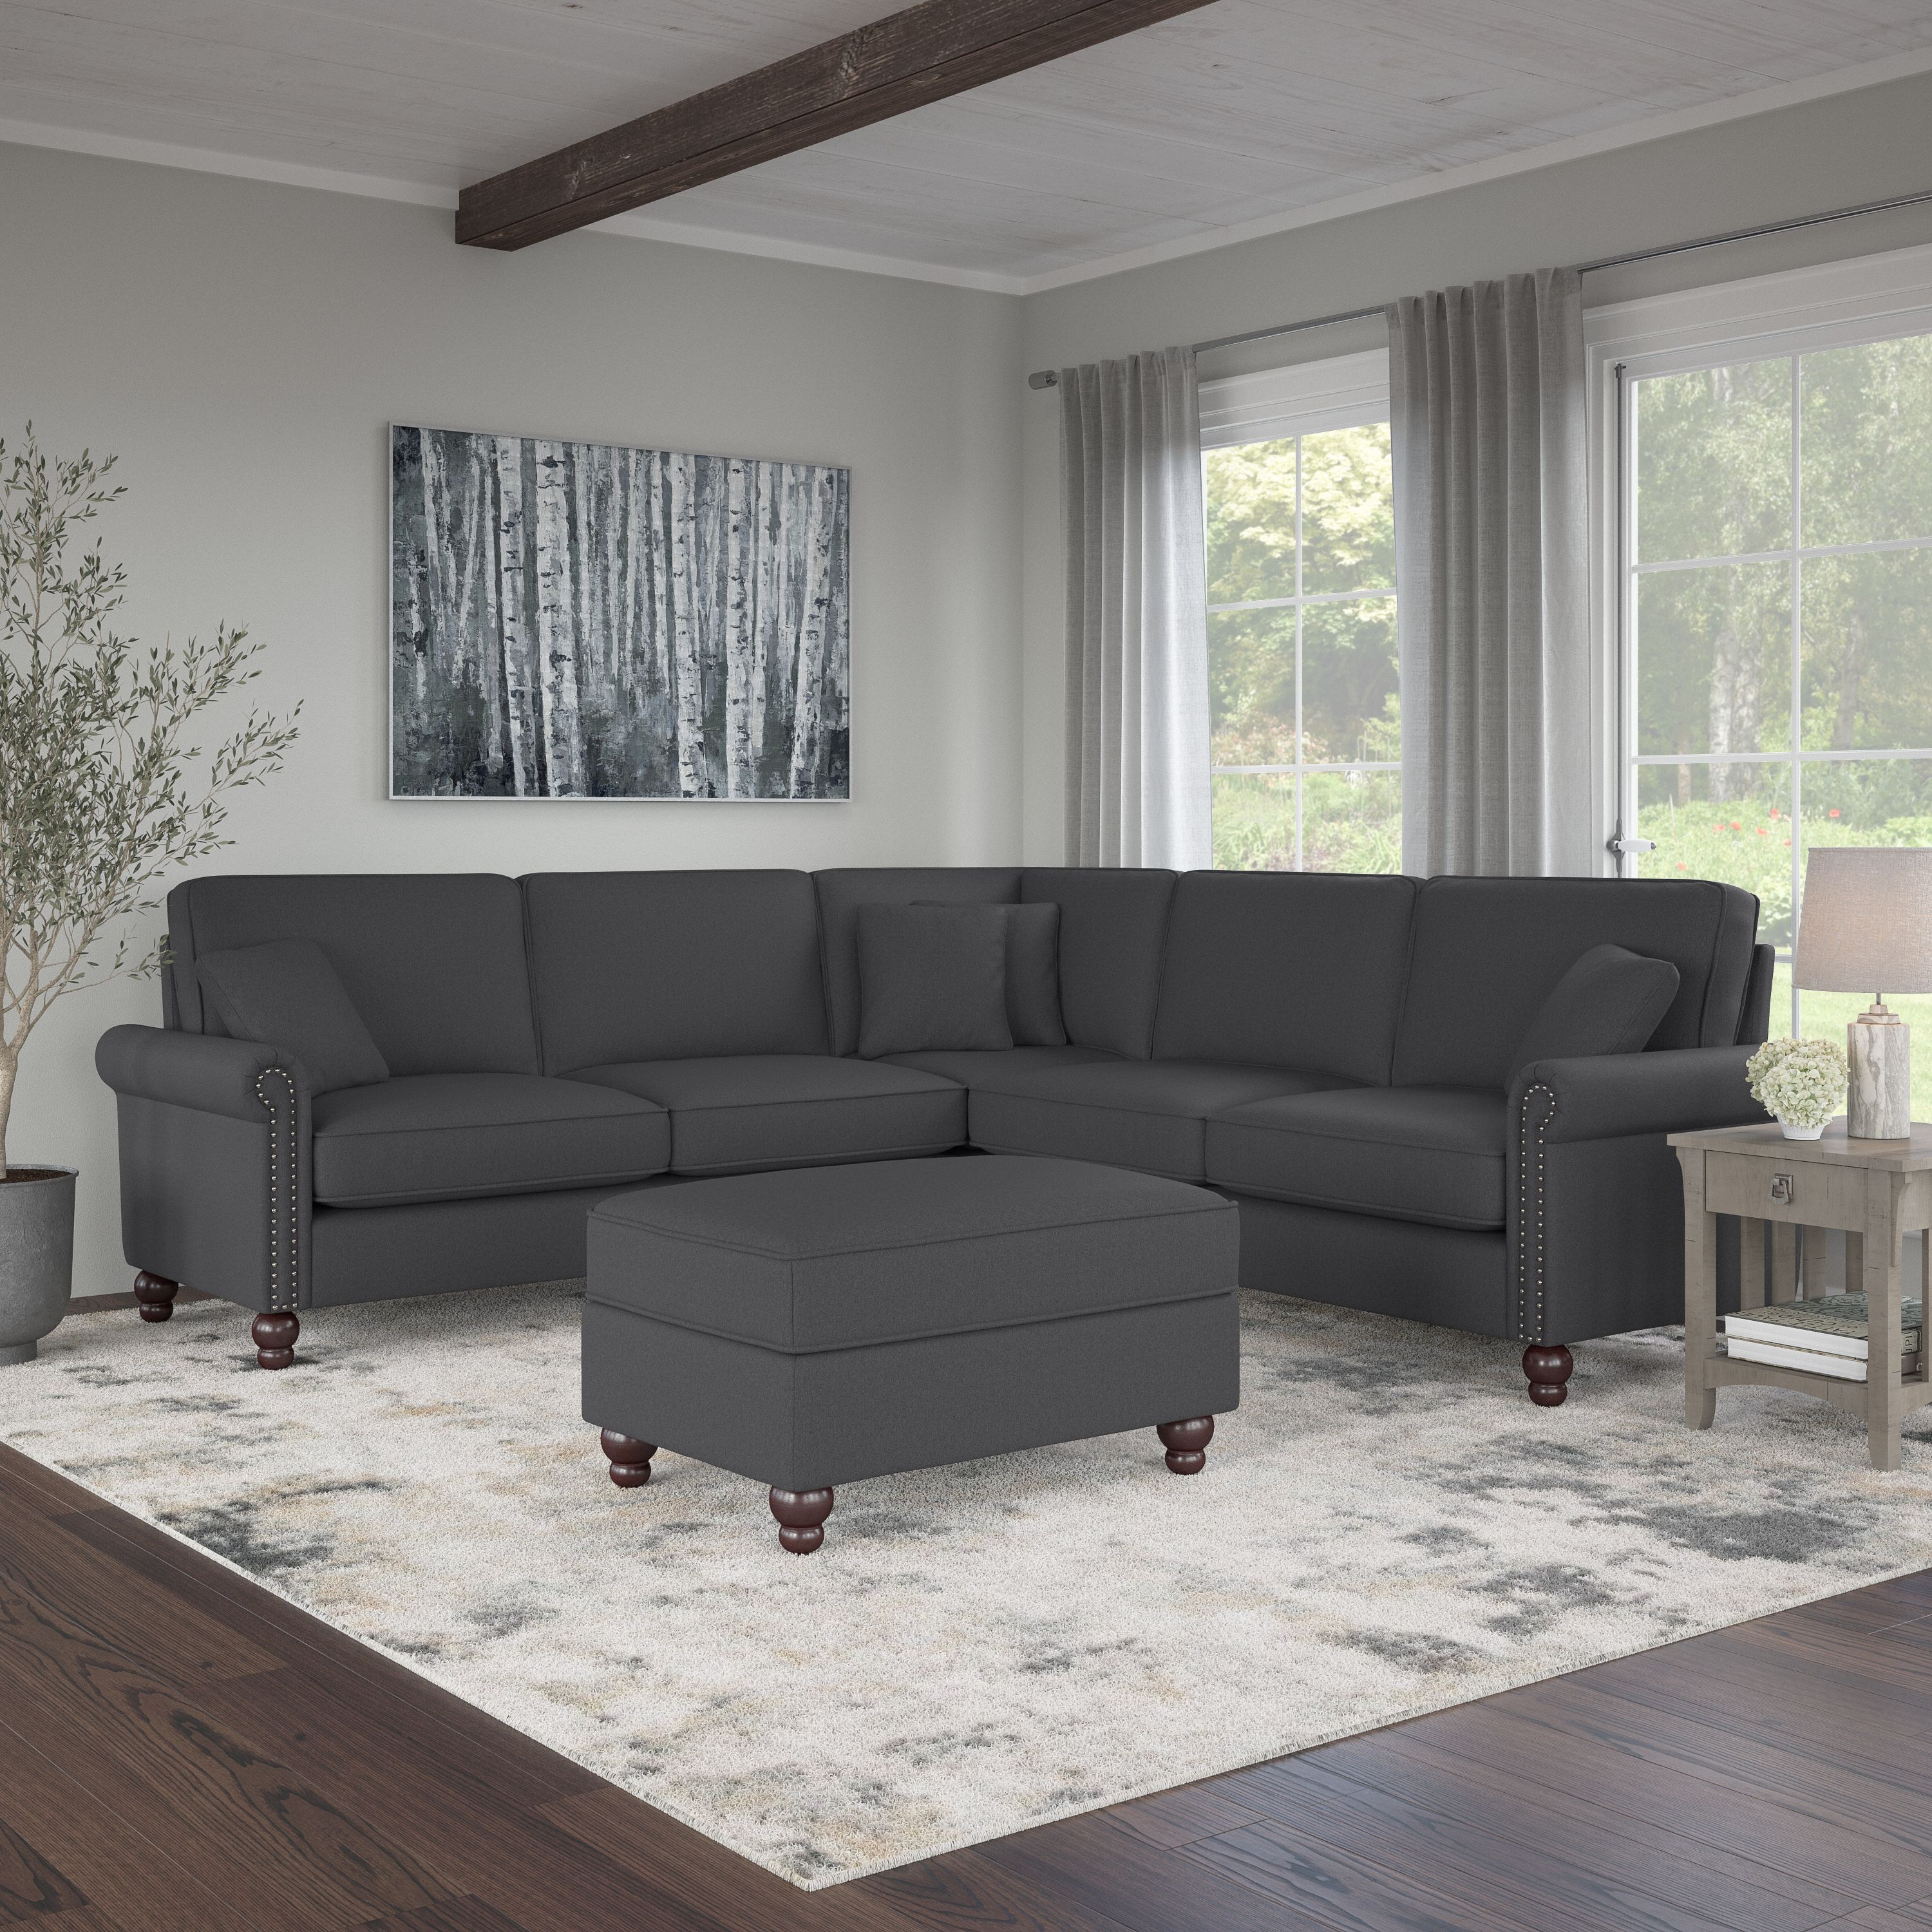 Shop Bush Furniture Coventry 99W L Shaped Sectional Couch with Ottoman 01 CVN003CGH #color_charcoal gray herringbone fabr